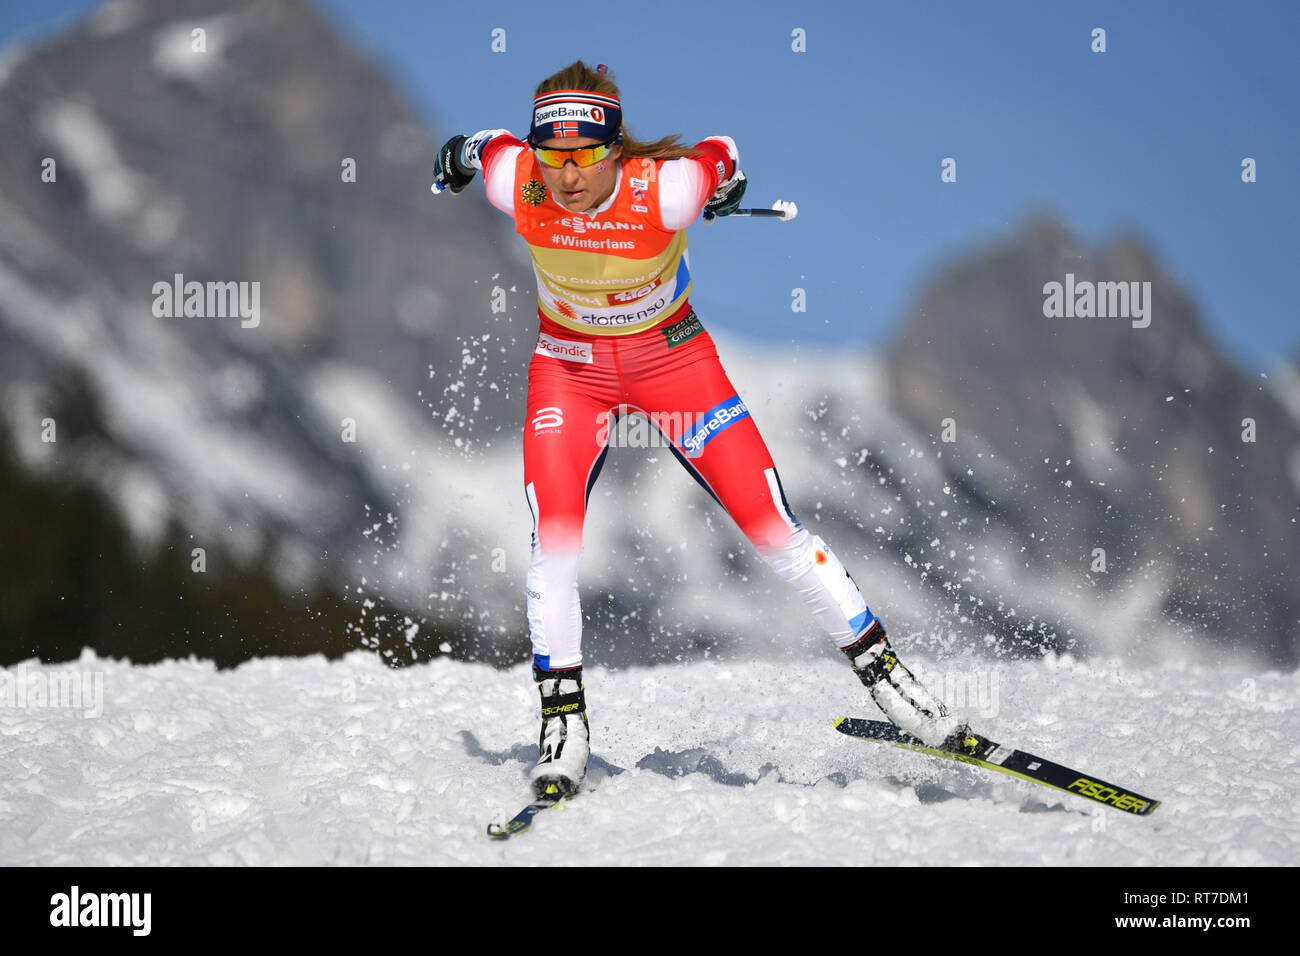 Seefeld, Austria. 28th February, 2019. Therese JOHAUG (NOR), Action, Single  Action, Single Image, Cut Out, Full Body Shot, Whole Figure. Cross country  Ladies 4 x 5 km Relay Classic/Free, cross-country skiing women's